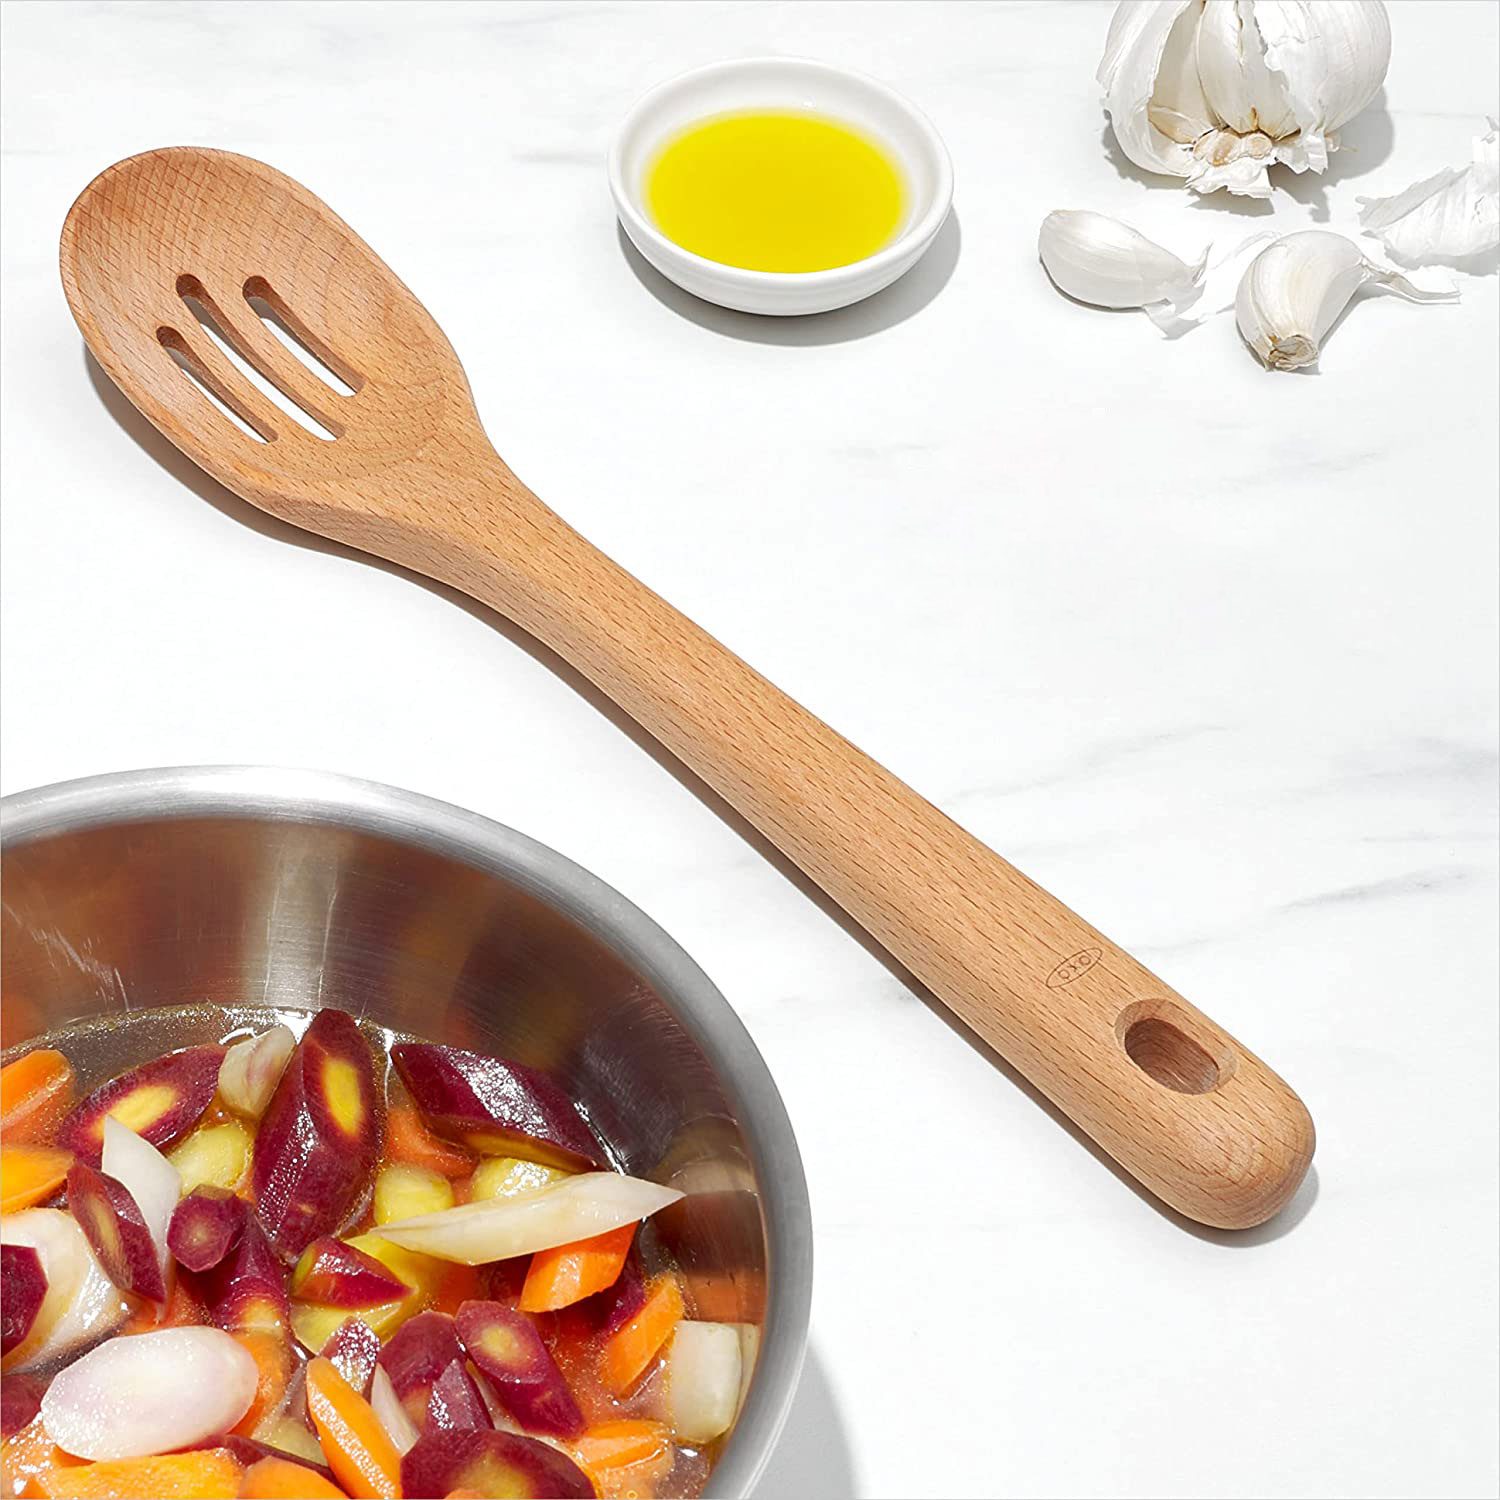 TasteGreatFoodie - Essential Cooking Tools for Beginners - Tips and Tricks